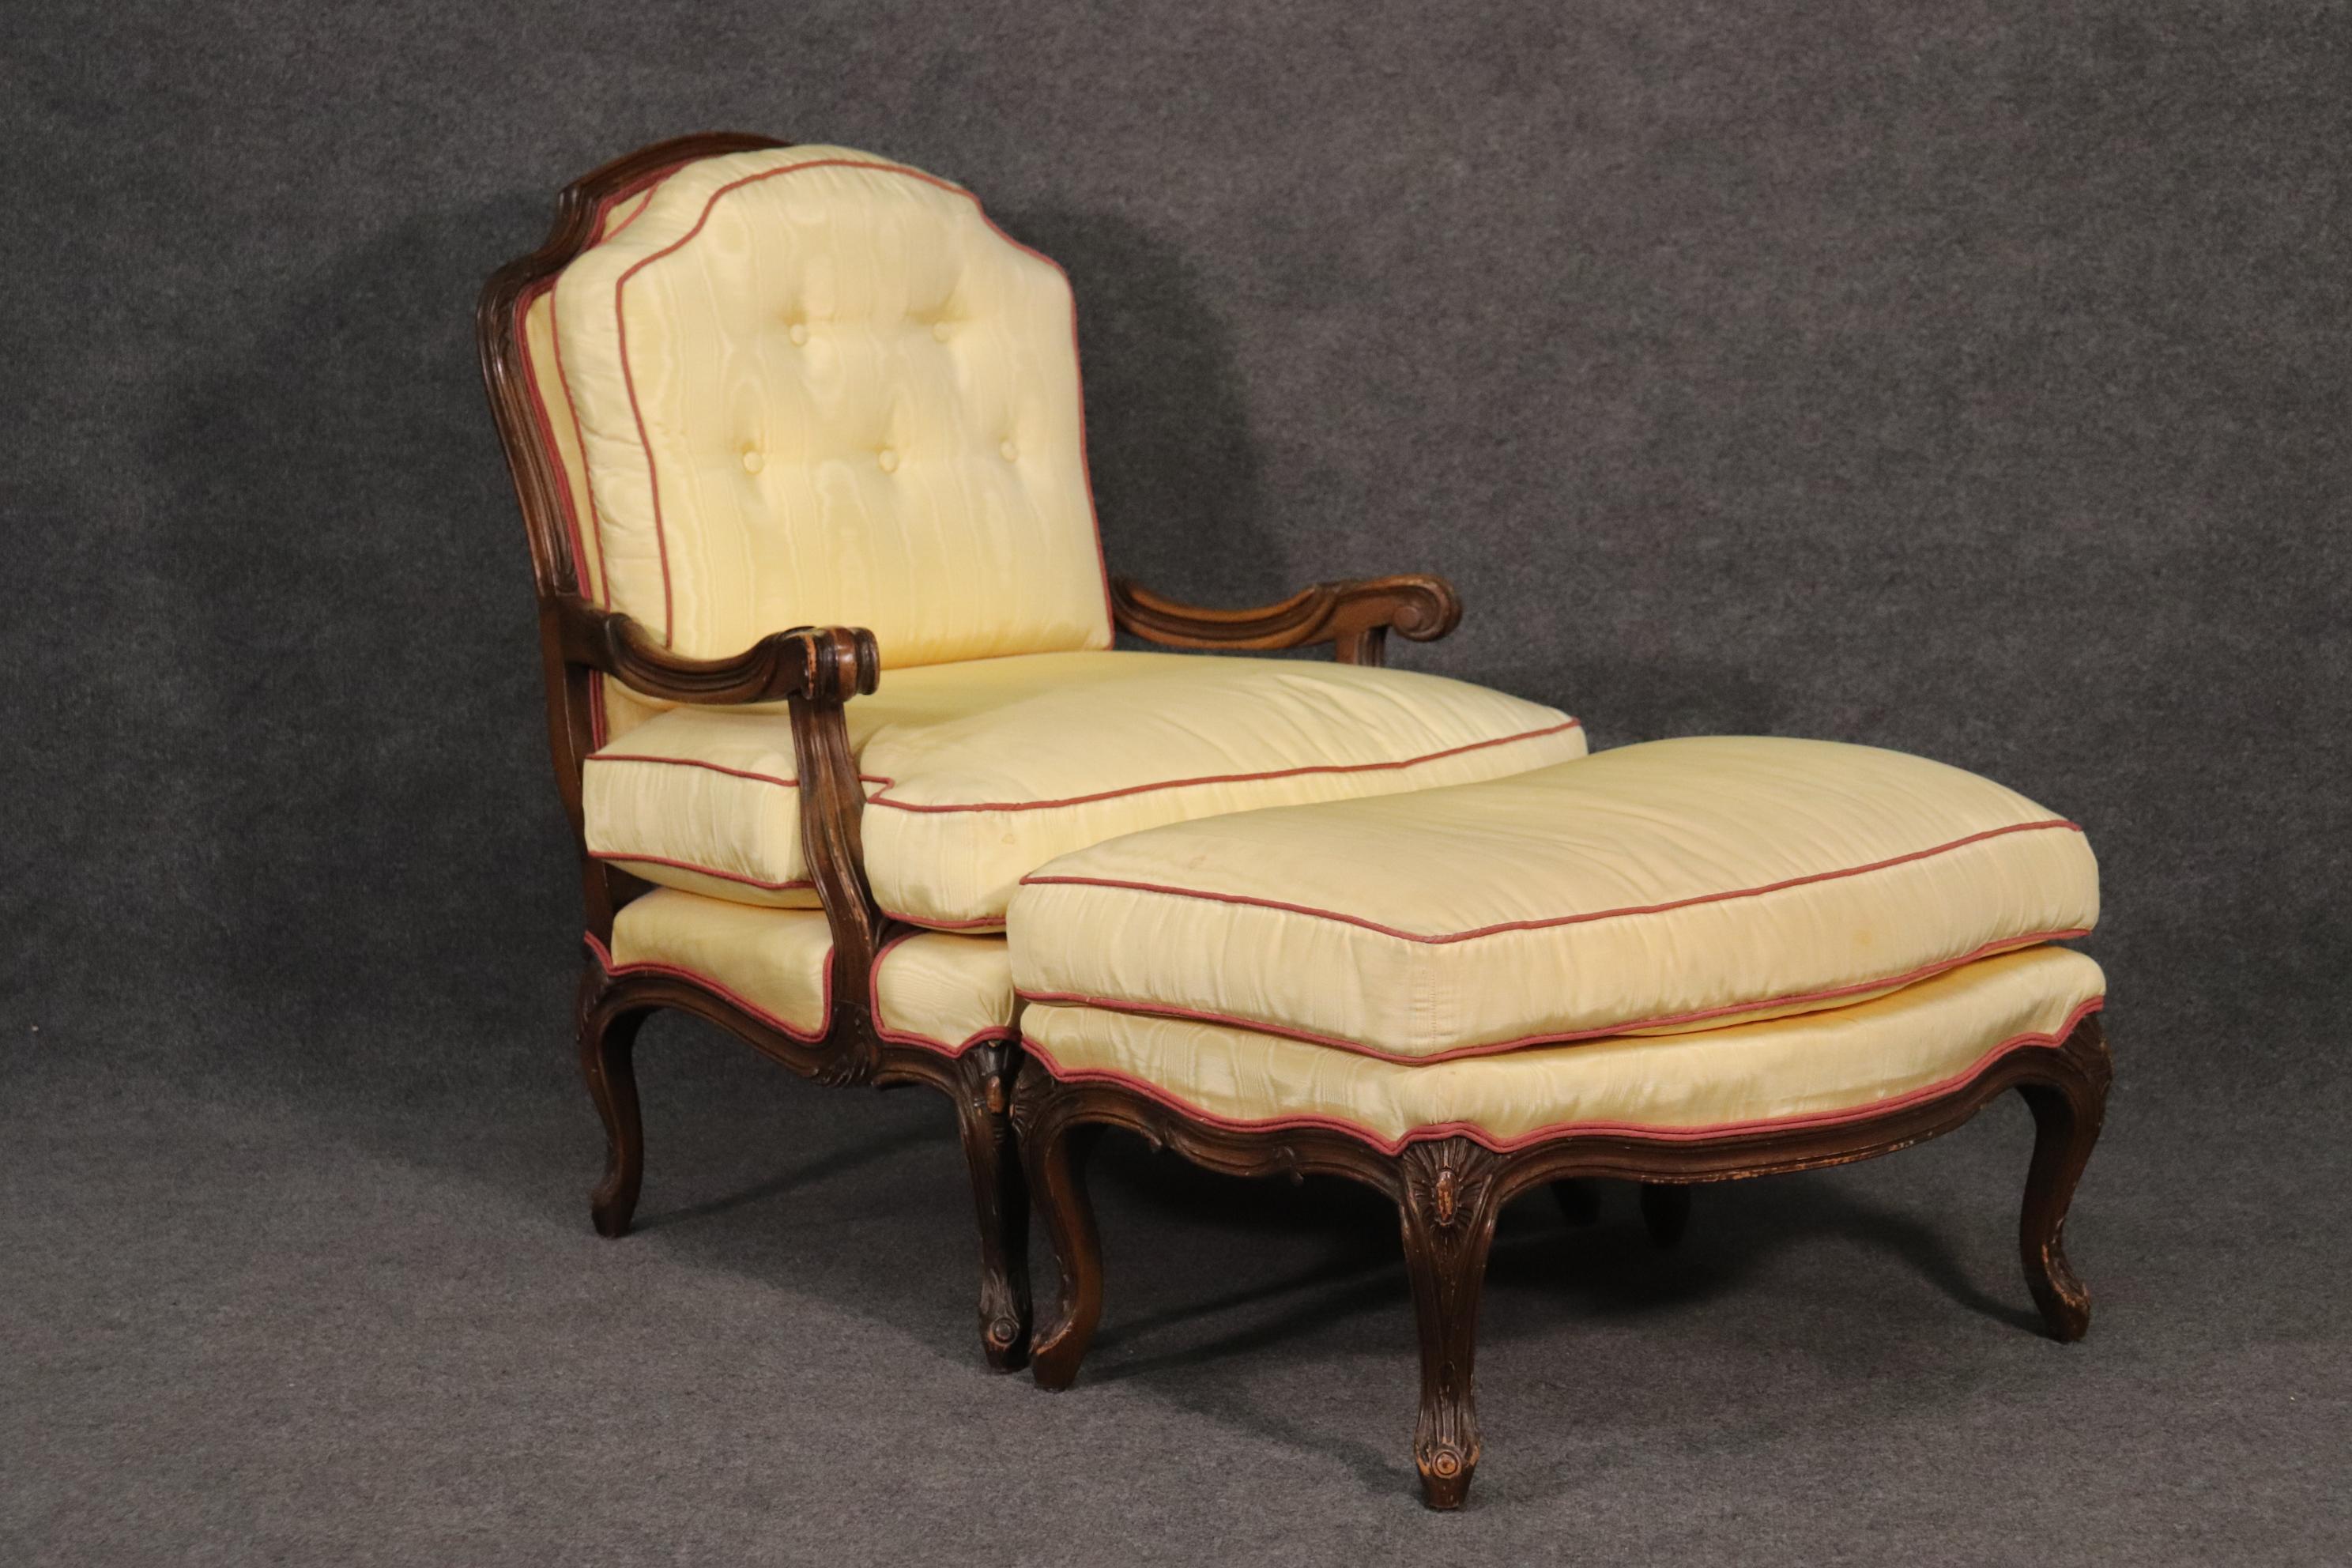 This is a beautiful American-made French style chair. The chair is matched with its own ottoman and is in good original condition. The chair measures 39 tall x 30 wide x 34 deep and the seat height is 19 and the ottoman measures 30 wide x 21 deep x